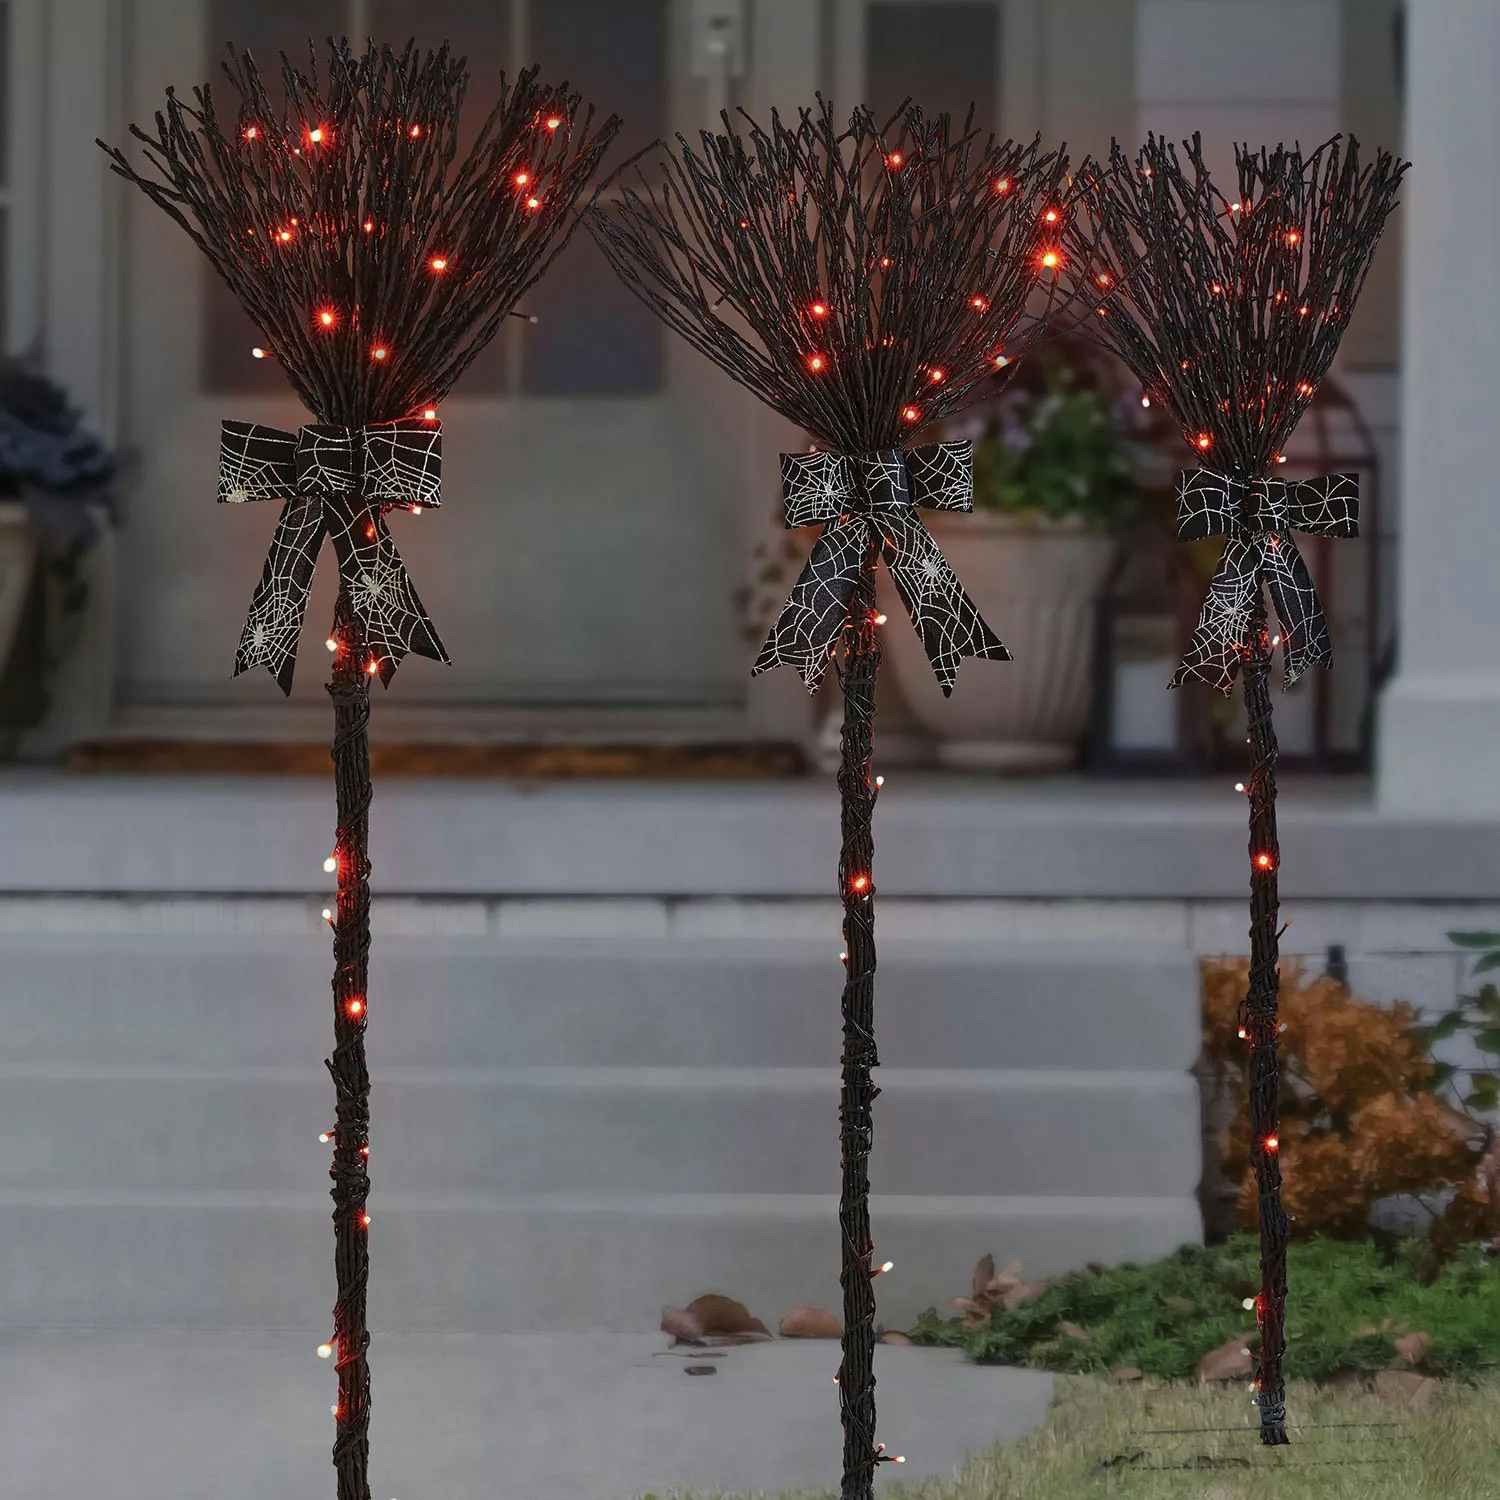 3 foot broom stick decorations that are pre lit